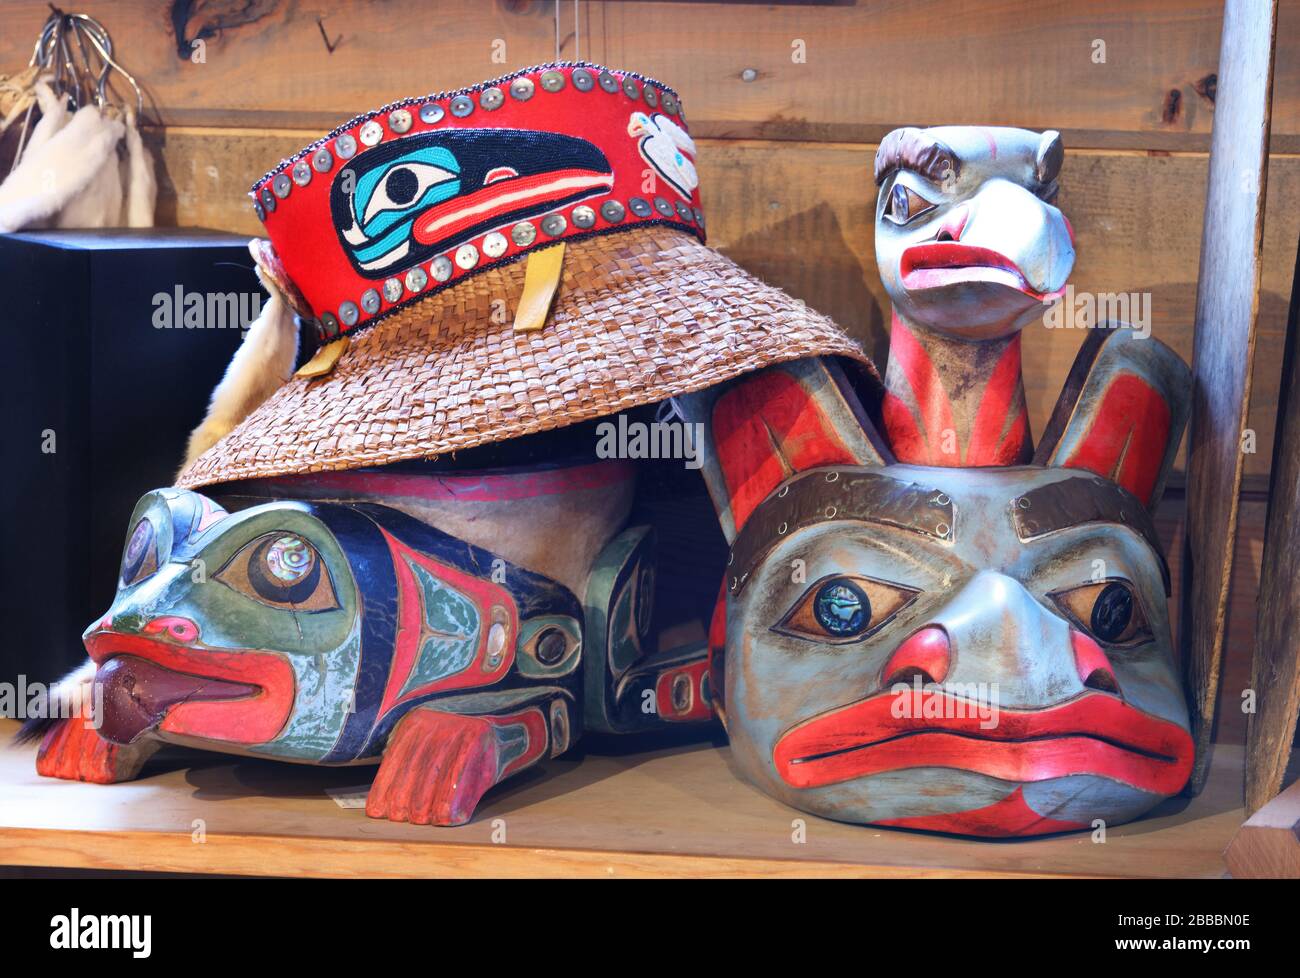 Haida-style straw hat on top of a Tlingi-inspired frog forehead mask. To the right is a Tlingit-inspired bear forehead mask in native art shop Deil'e.ann & Tlingit Botanicals, Icy Strait Point, Alaska, U.S.A. Stock Photo